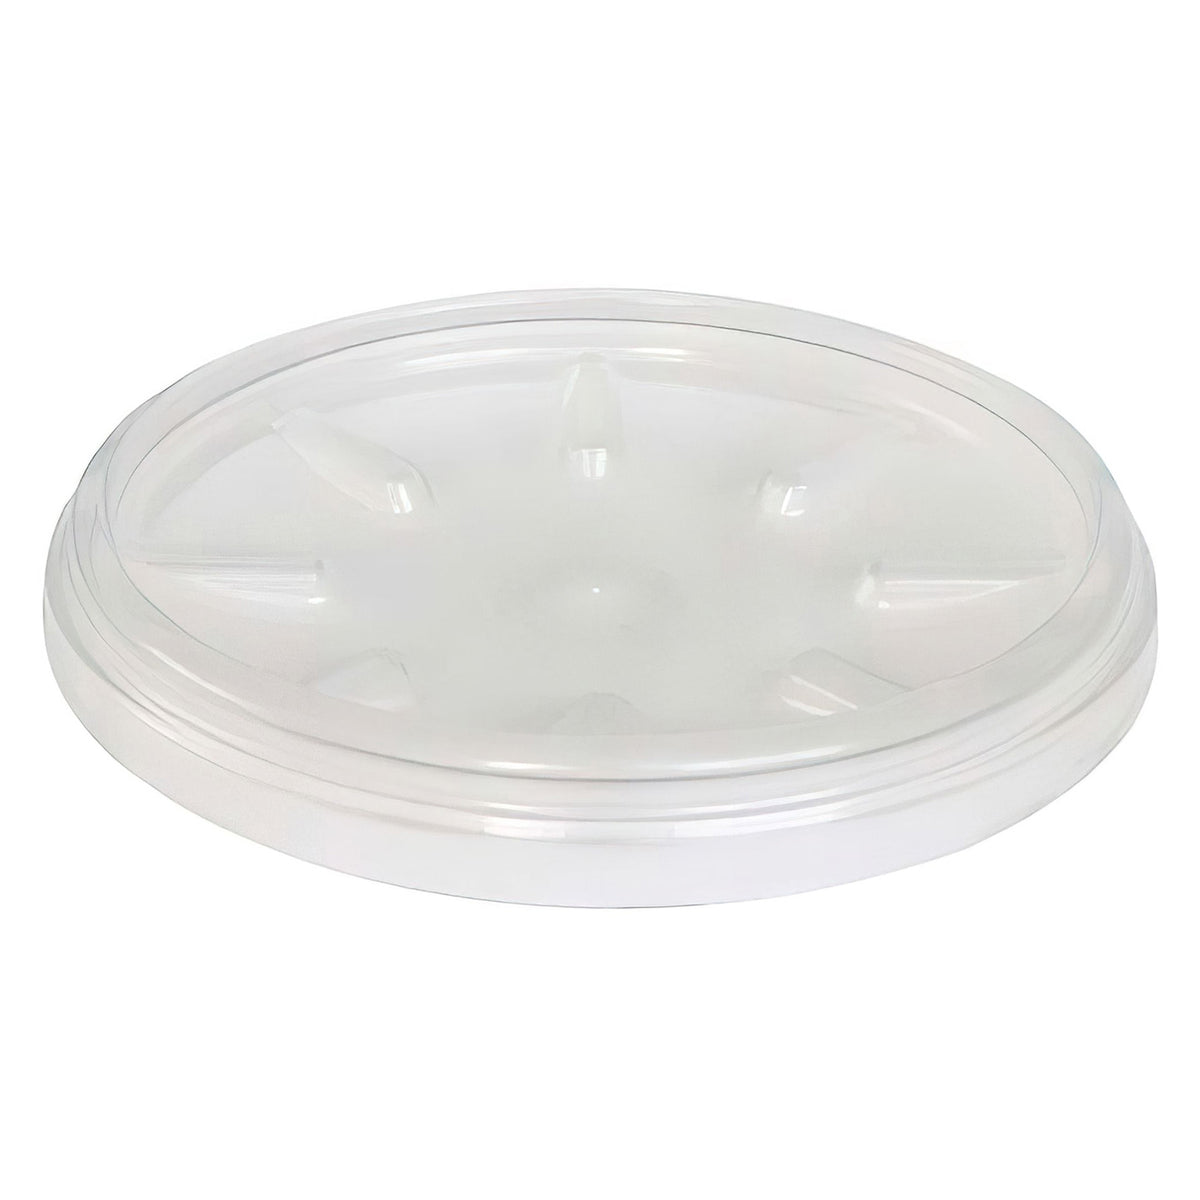 Yamaken Plastic Saucer for Water Pitcher